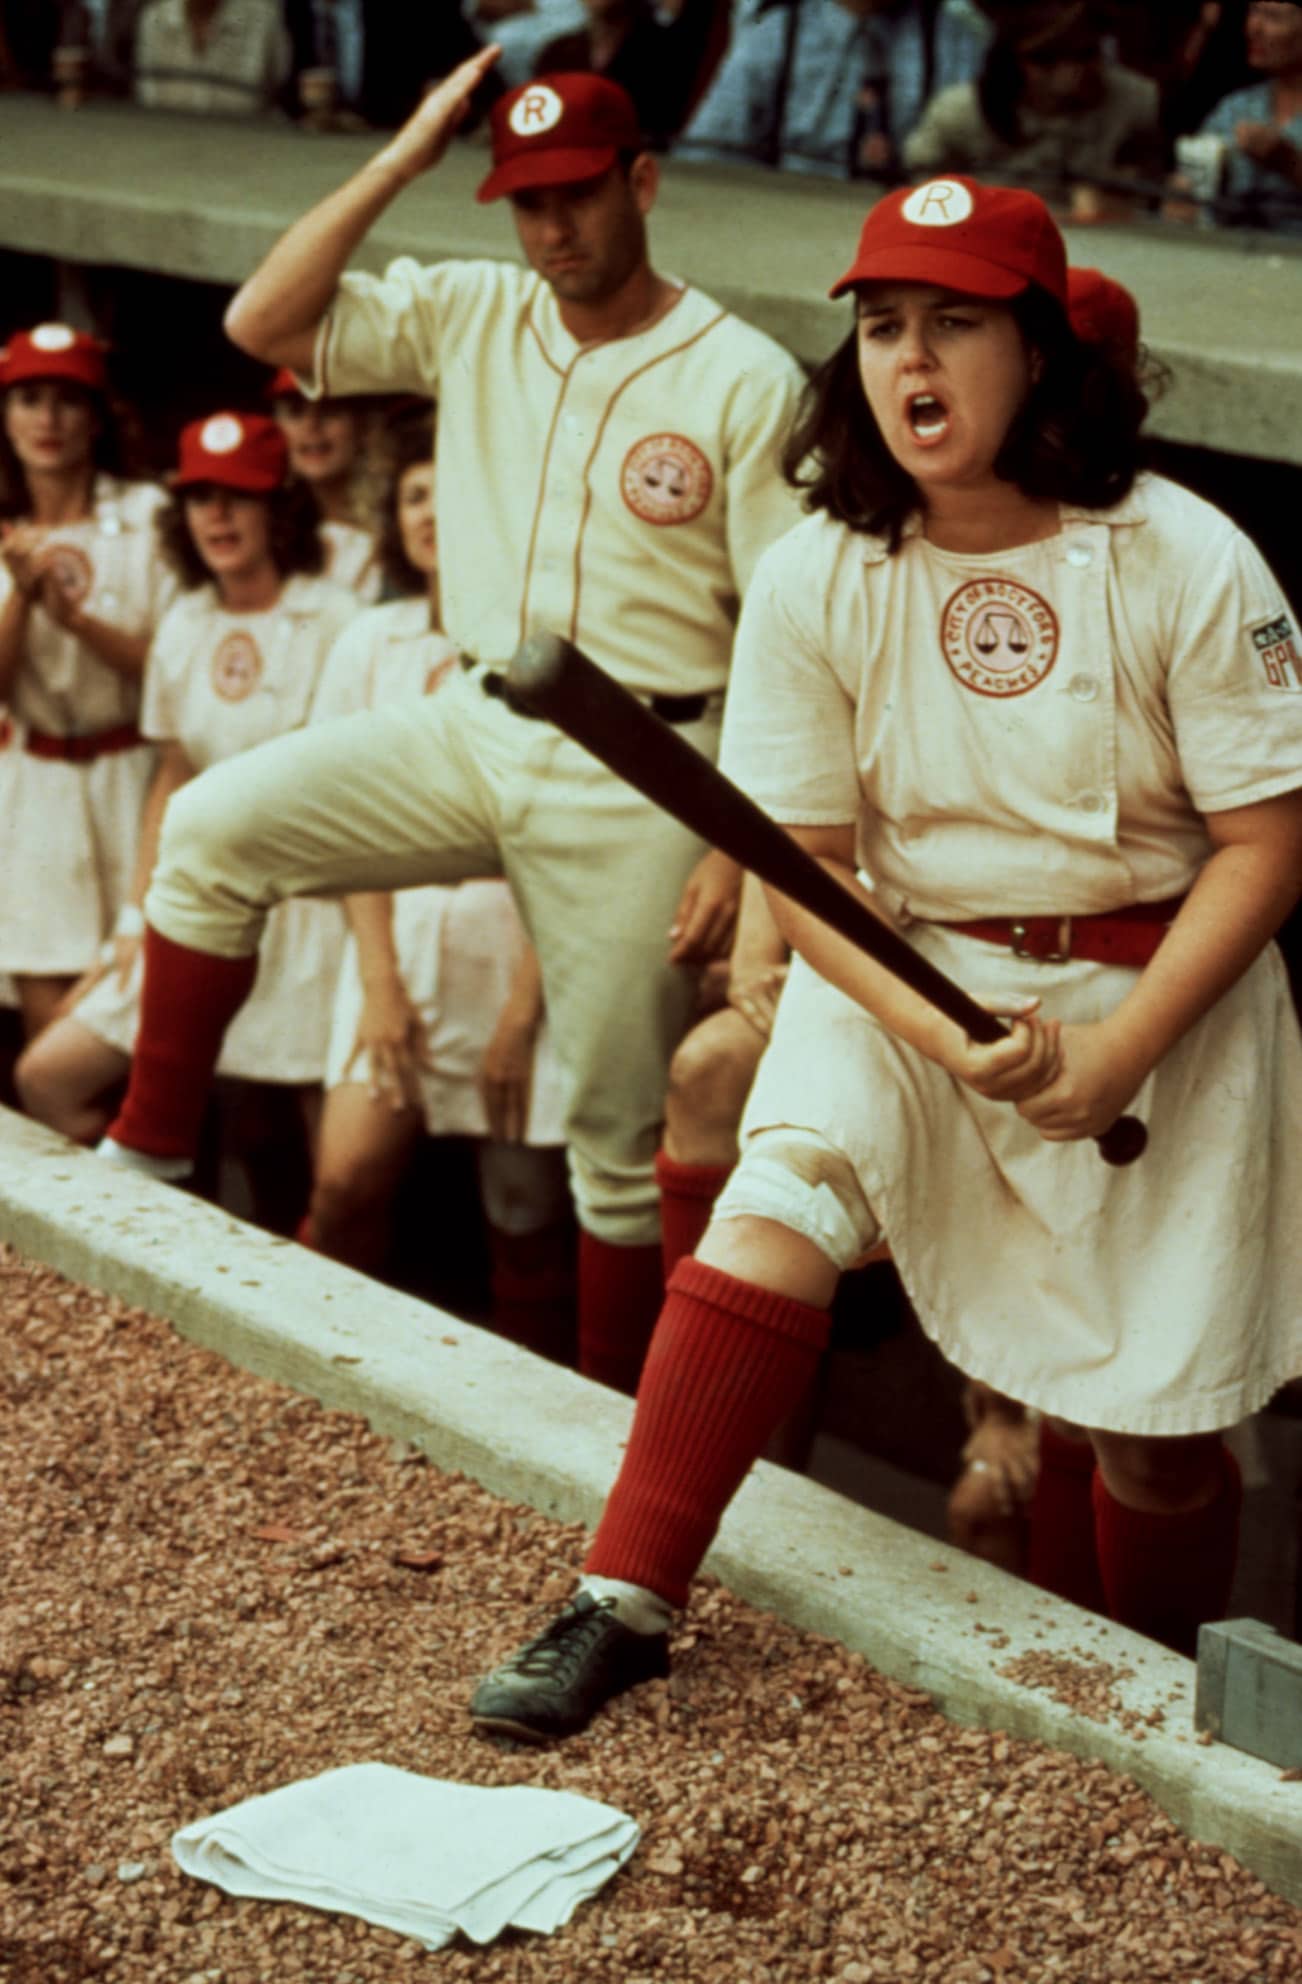 A LEAGUE OF THEIR OWN, Rosie O'Donnell, Tom Hanks, 1992